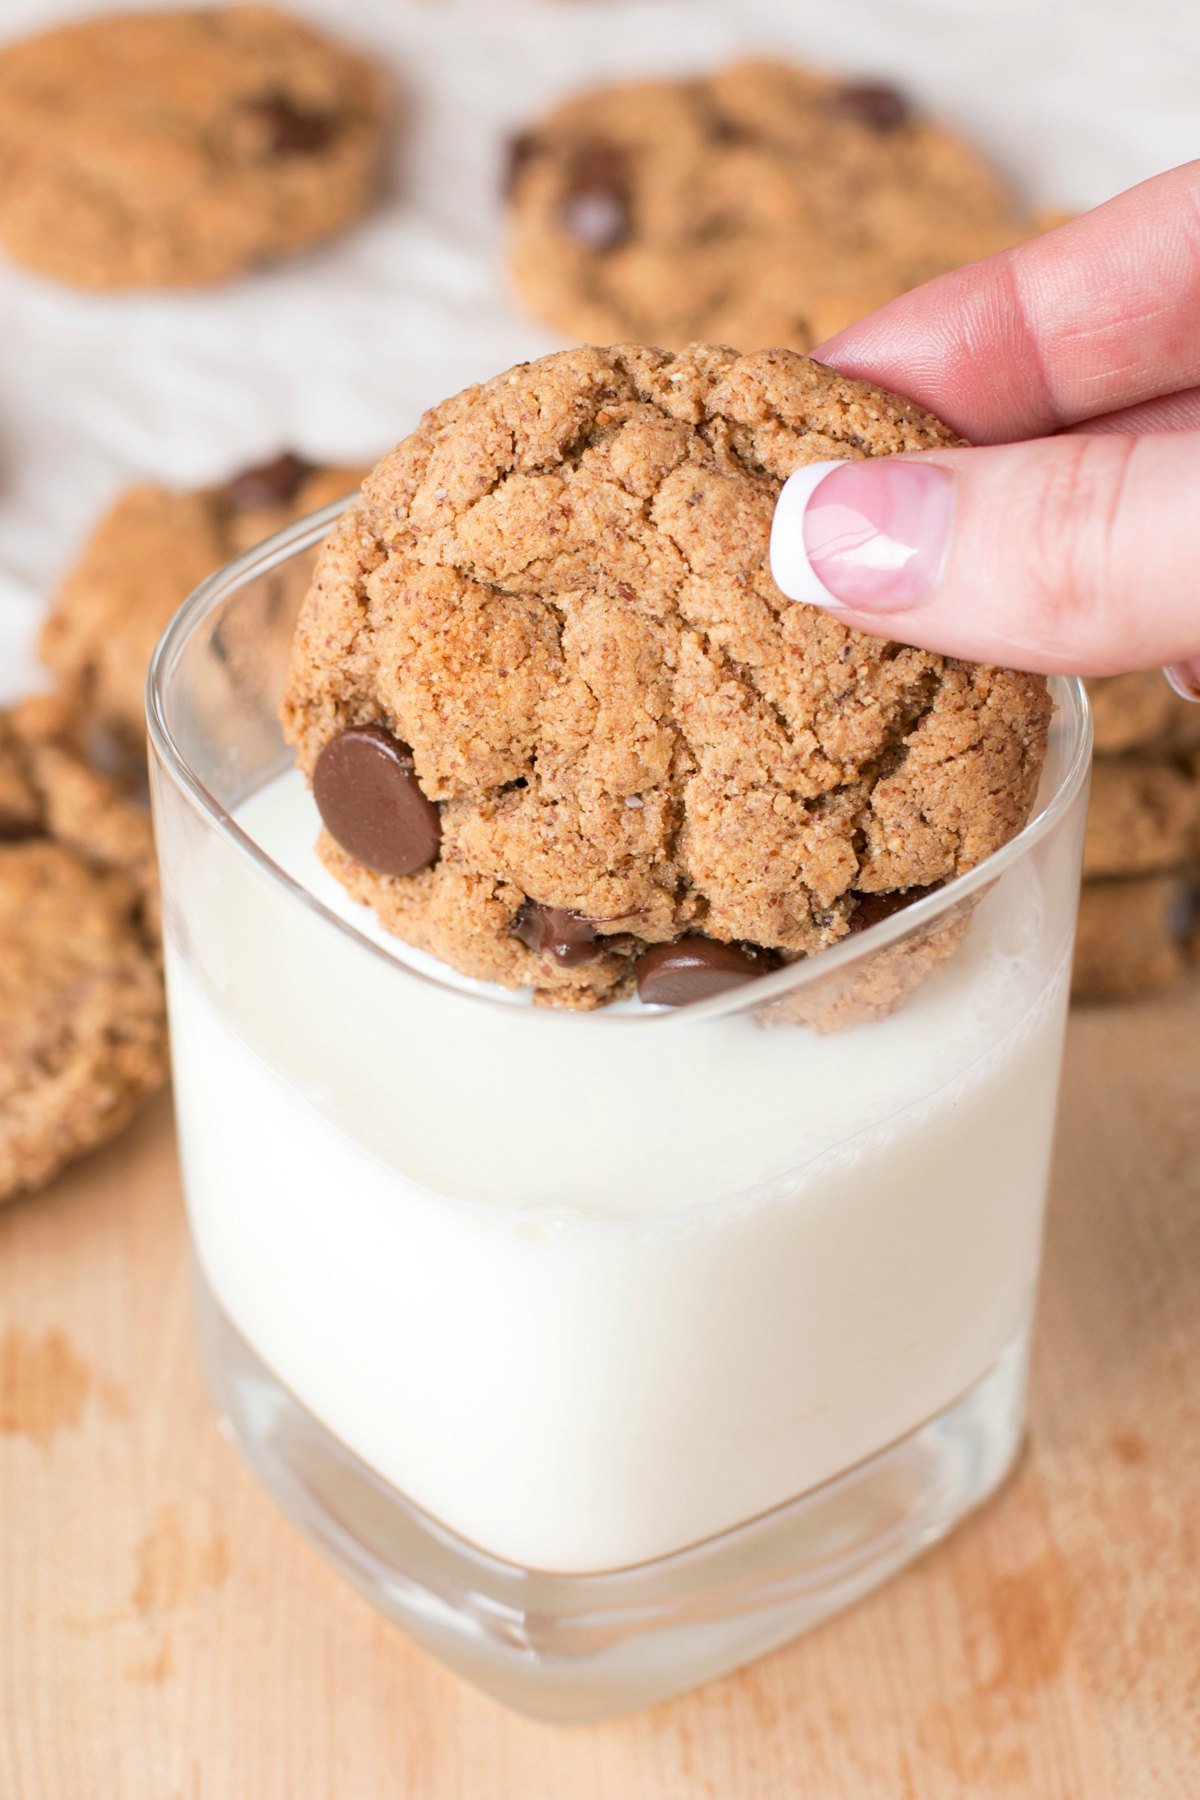 Dunking a chocolate chip almond butter cookie into a glass of milk